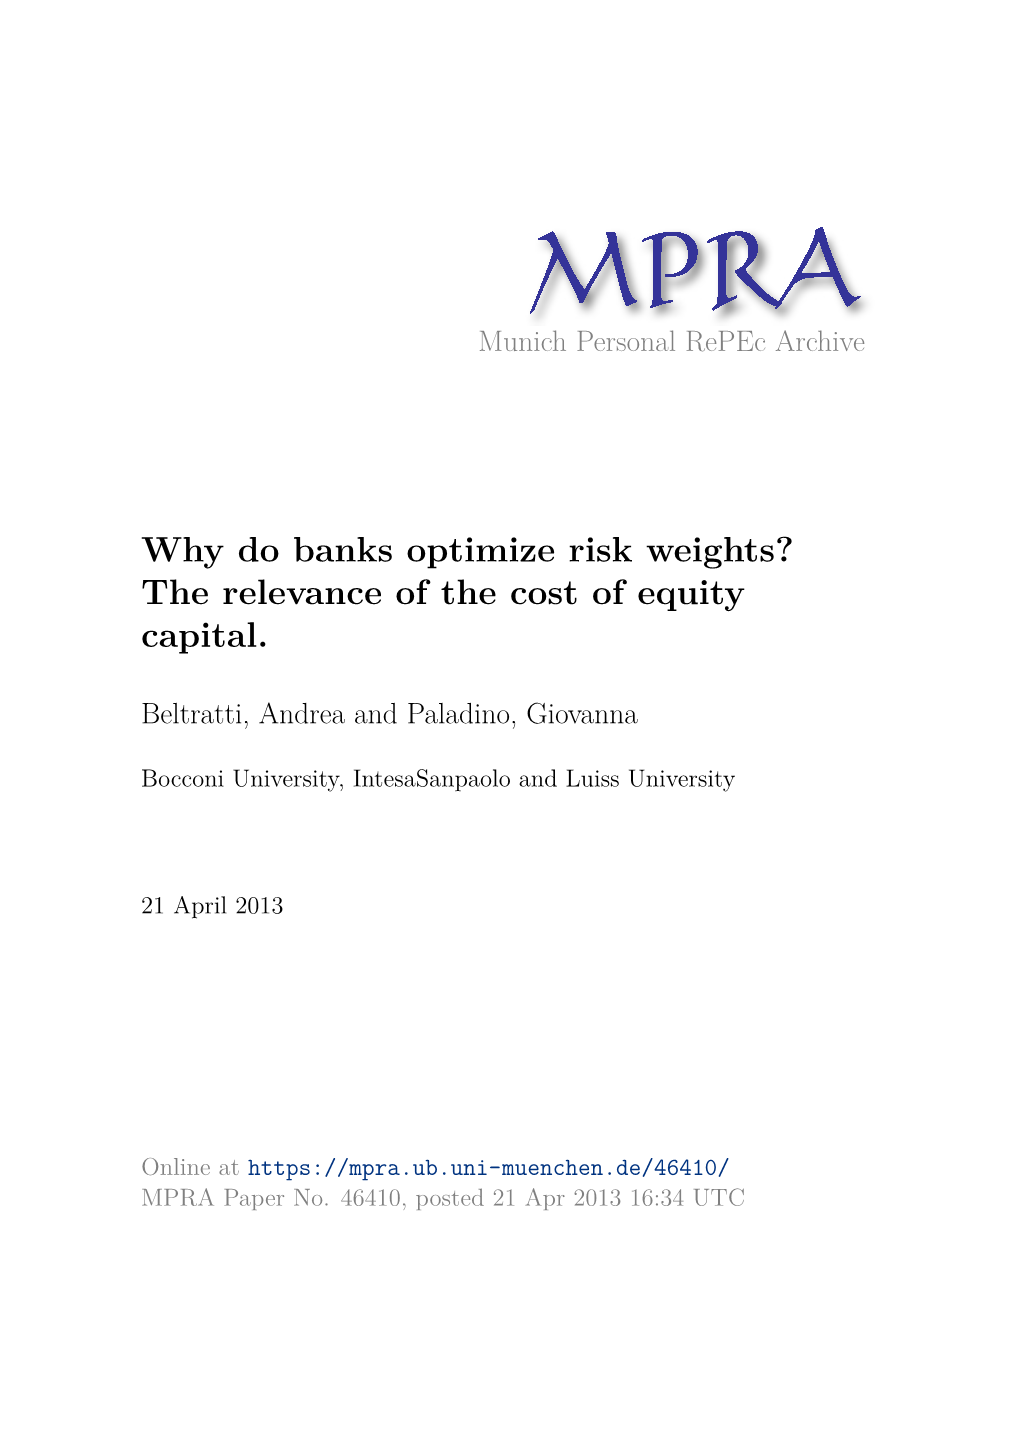 Why Do Banks Optimize Risk Weights? the Relevance of the Cost of Equity Capital